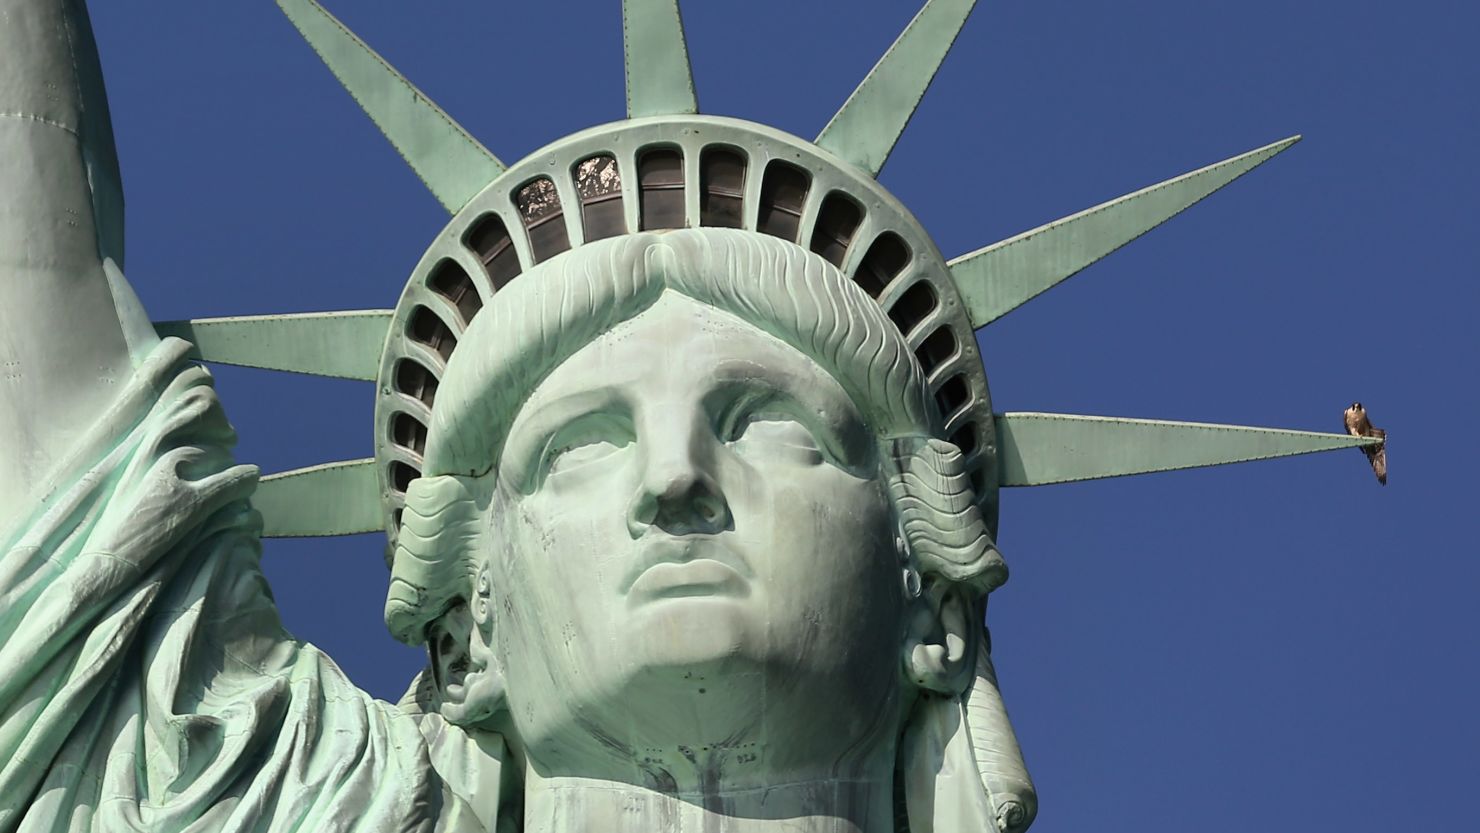  The Statue of Liberty has been closed since October 29 due to infrastructure damage caused by Superstorm Sandy. 